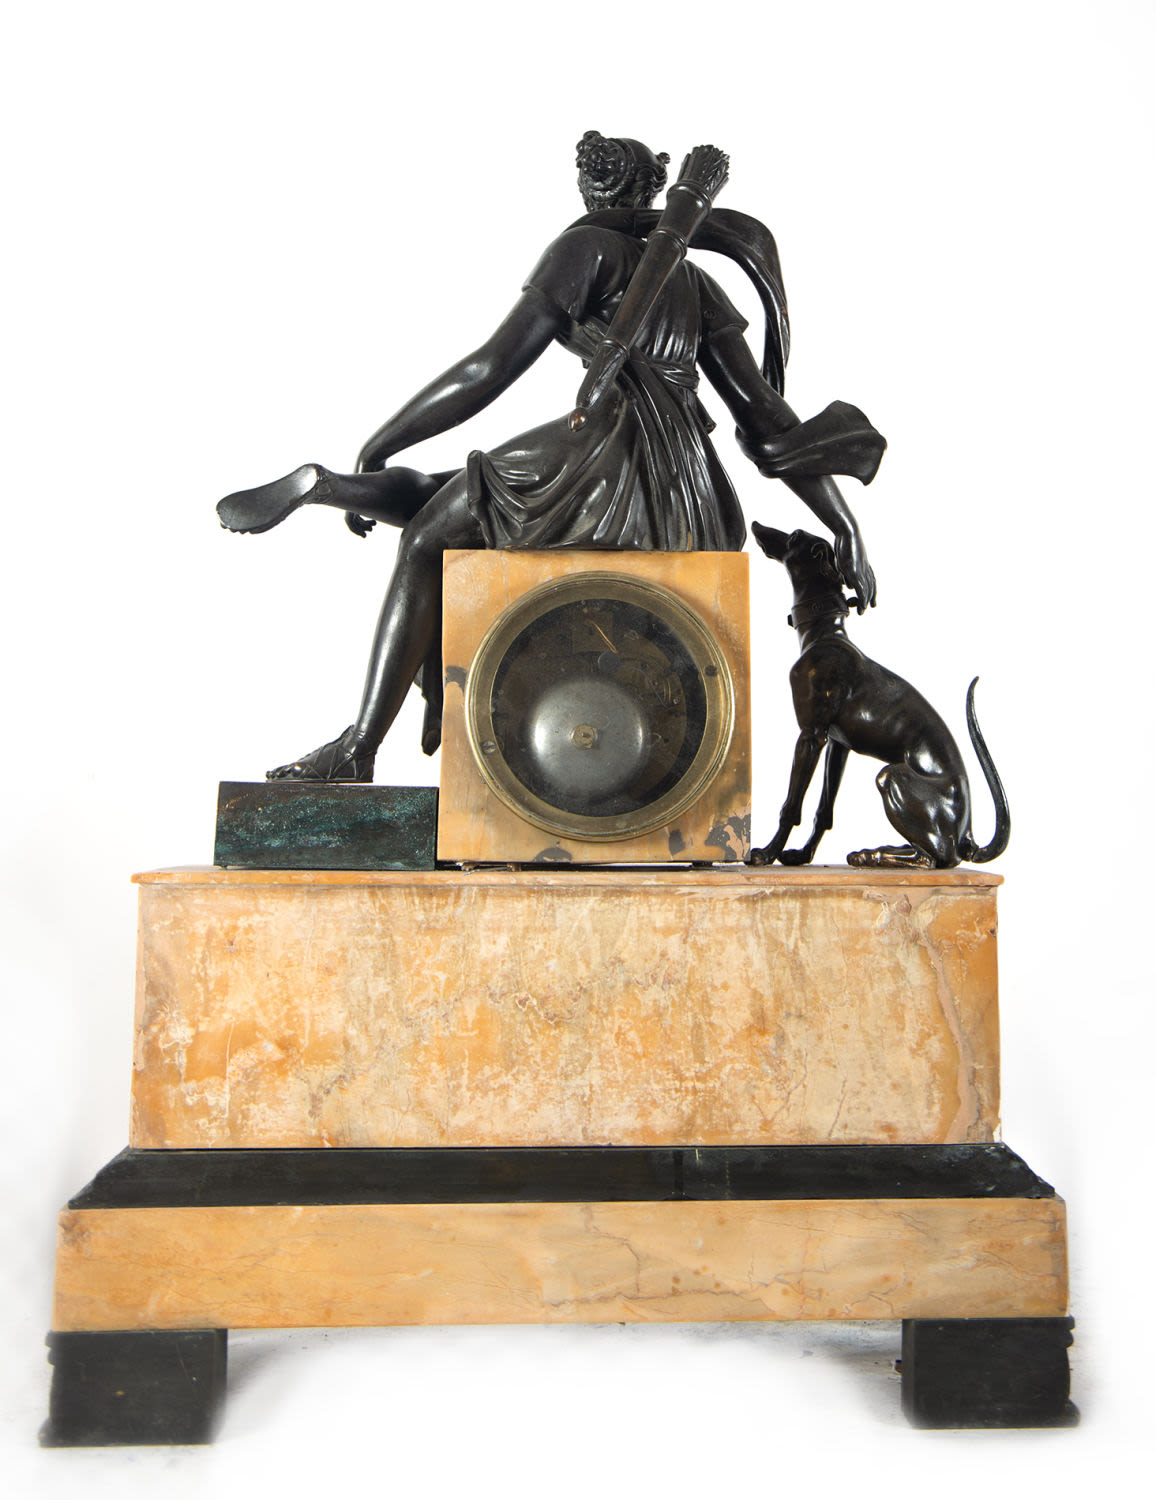 Empire style clock in patinated bronze and Aleppo marble depicting Diana the huntress, late 19th cen - Image 4 of 4